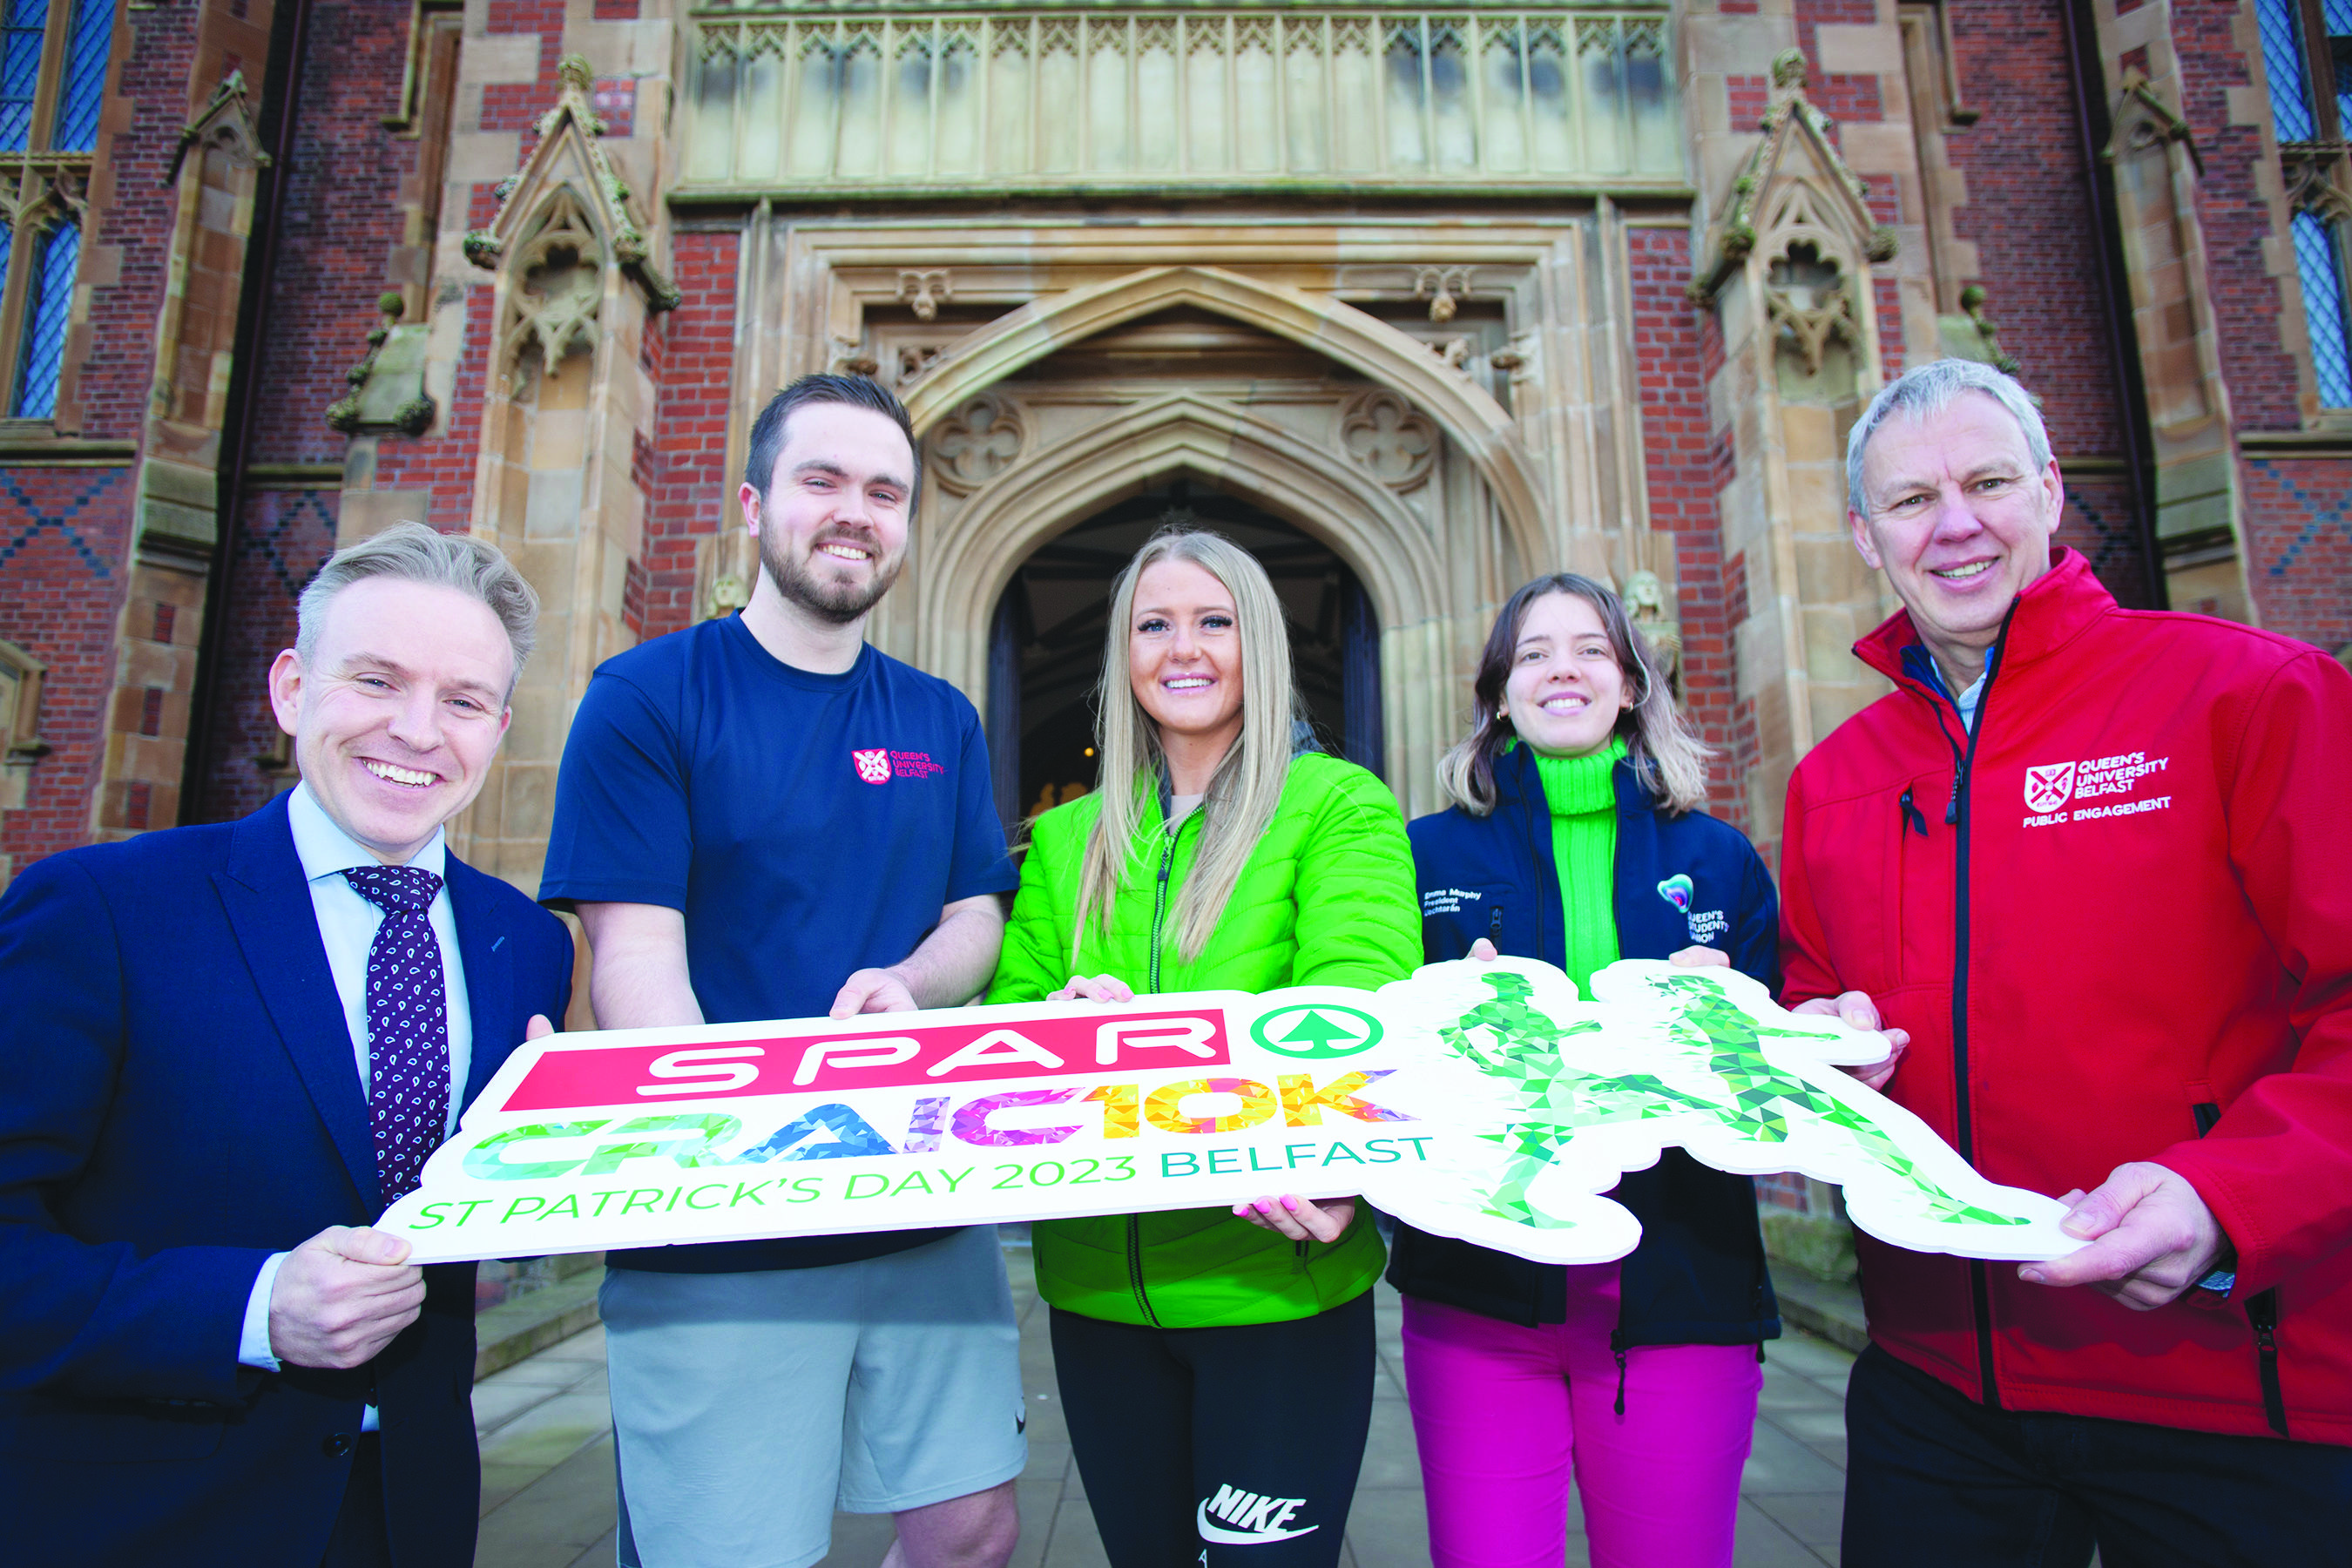 Ryan Feeney, Acting Vice-President of Strategic Engagement and External Affairs, QUB and Queen\'s staff members Euan McLaughlin, Emma Murphy and Dee Corbett with Amy Dickinson, Events Coordinator, SPAR Craic 10k